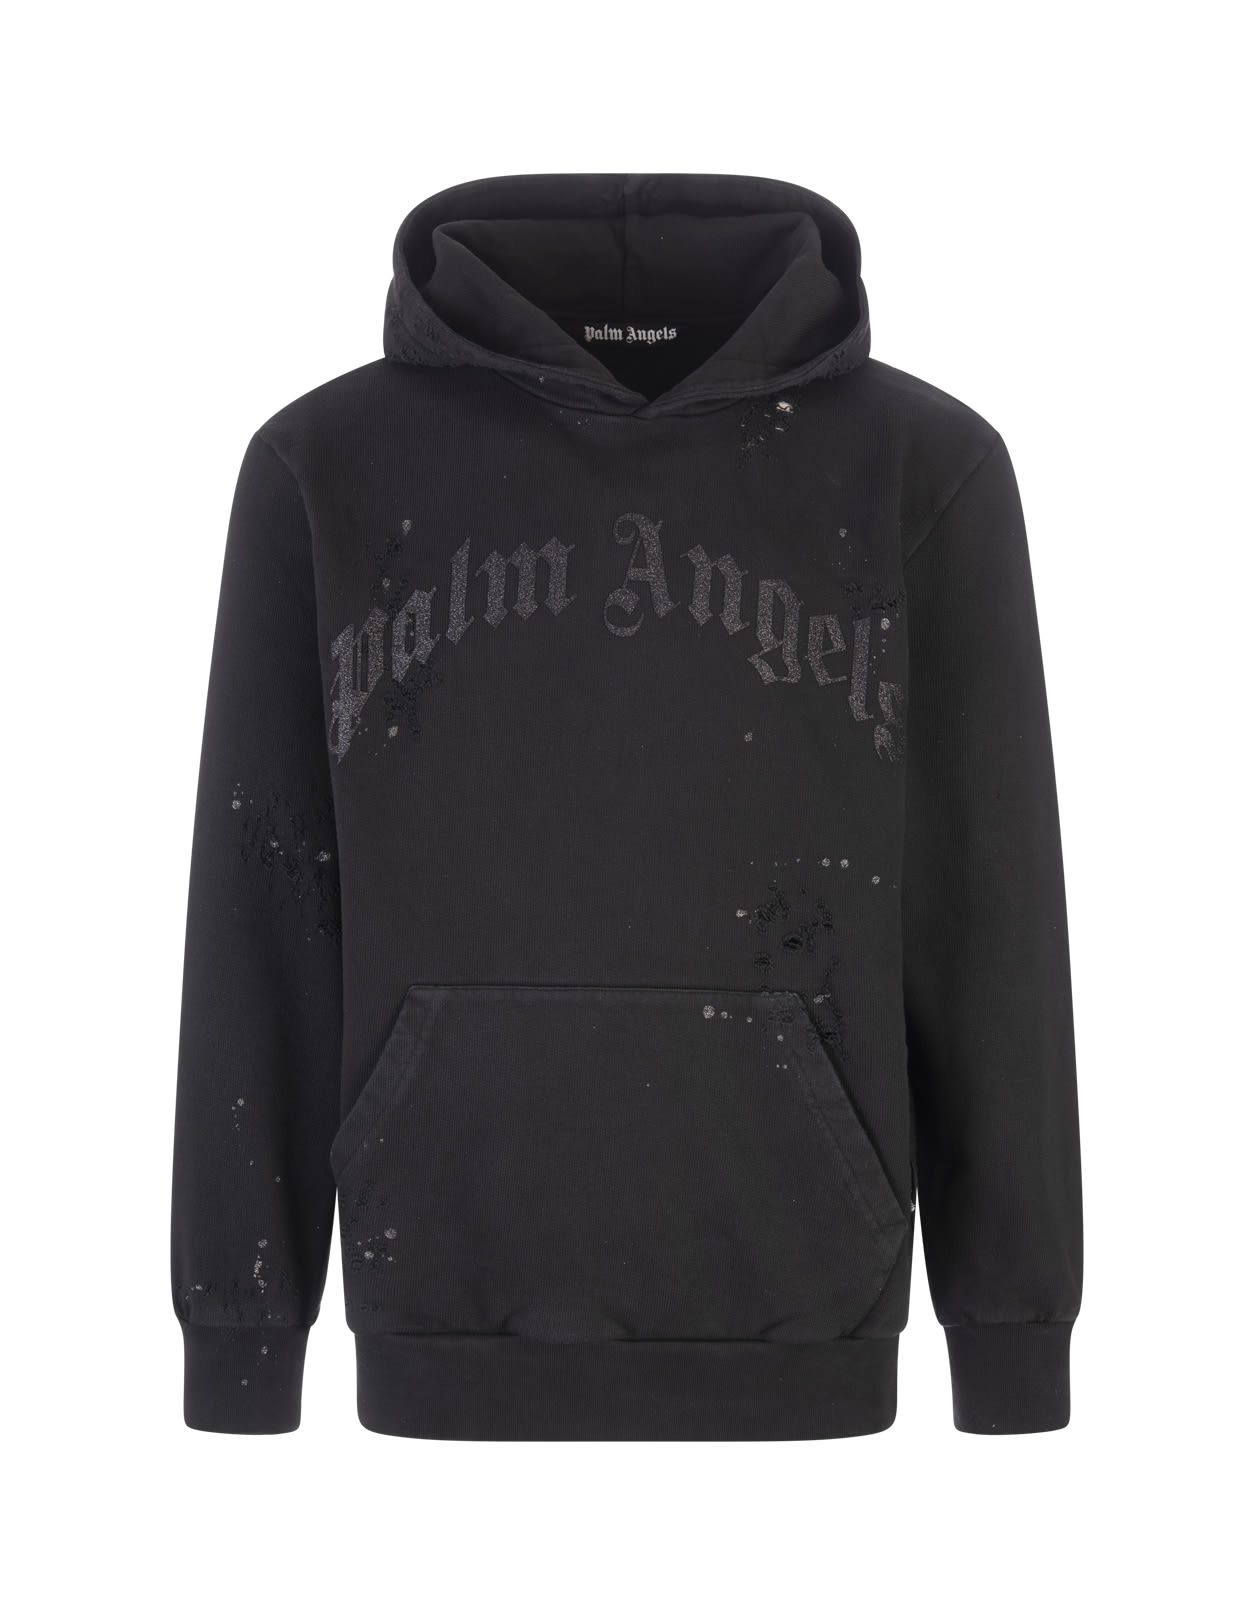 Palm Angels Black Hoodie With Glitter Logo